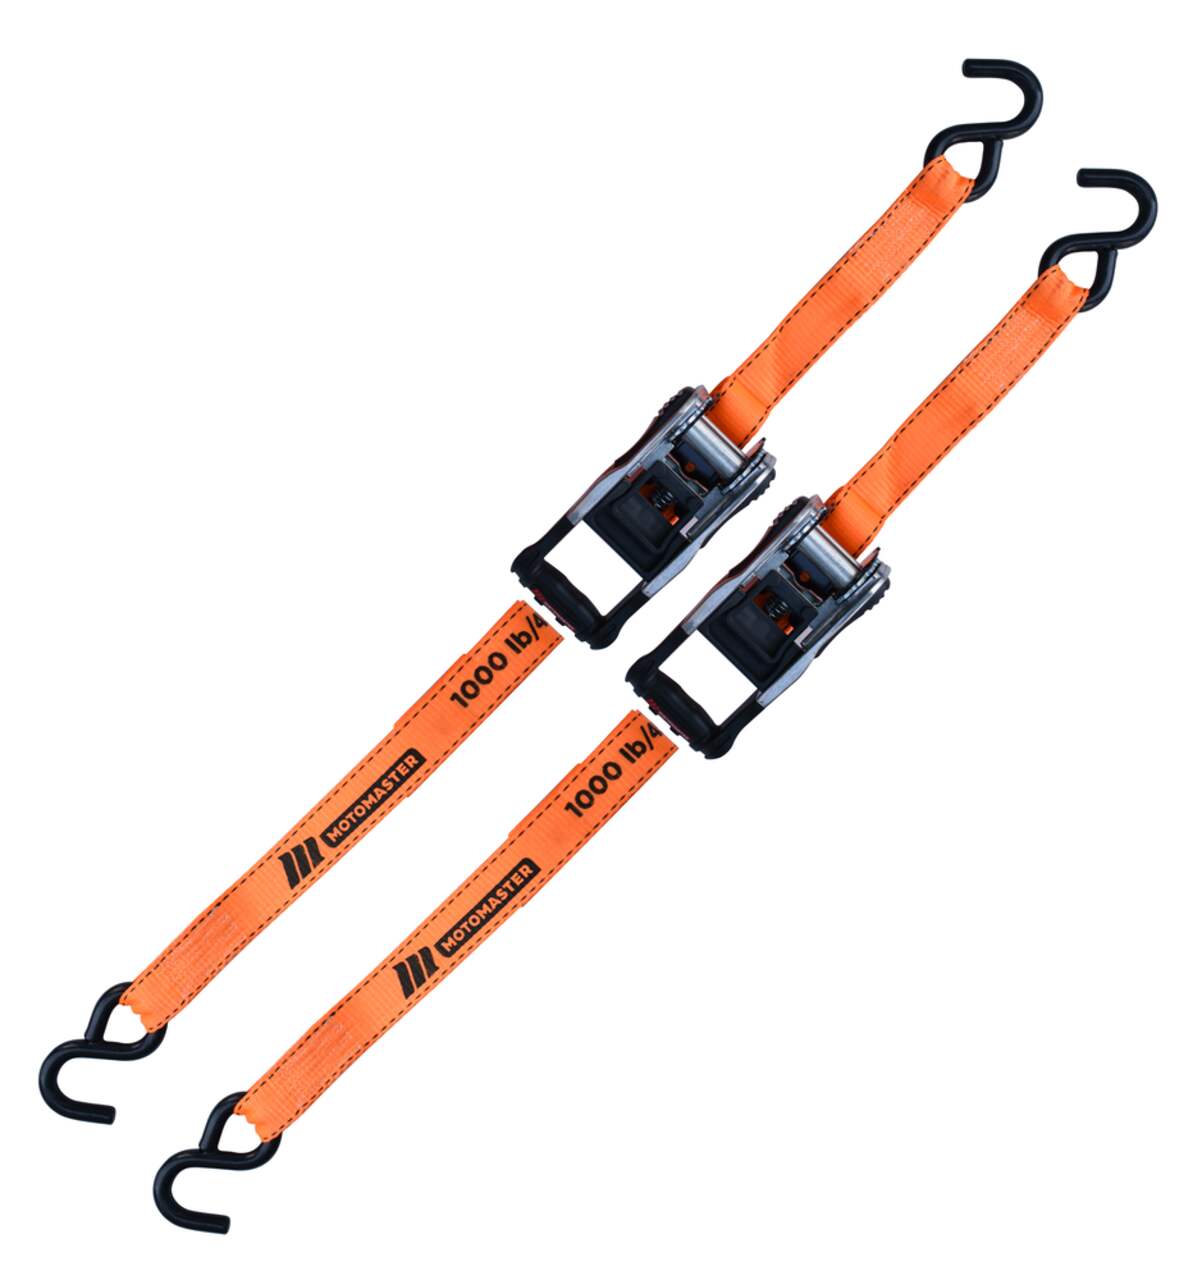 MotoMaster 3,000-lb Ratchet Tie Down Straps, with Power Grip